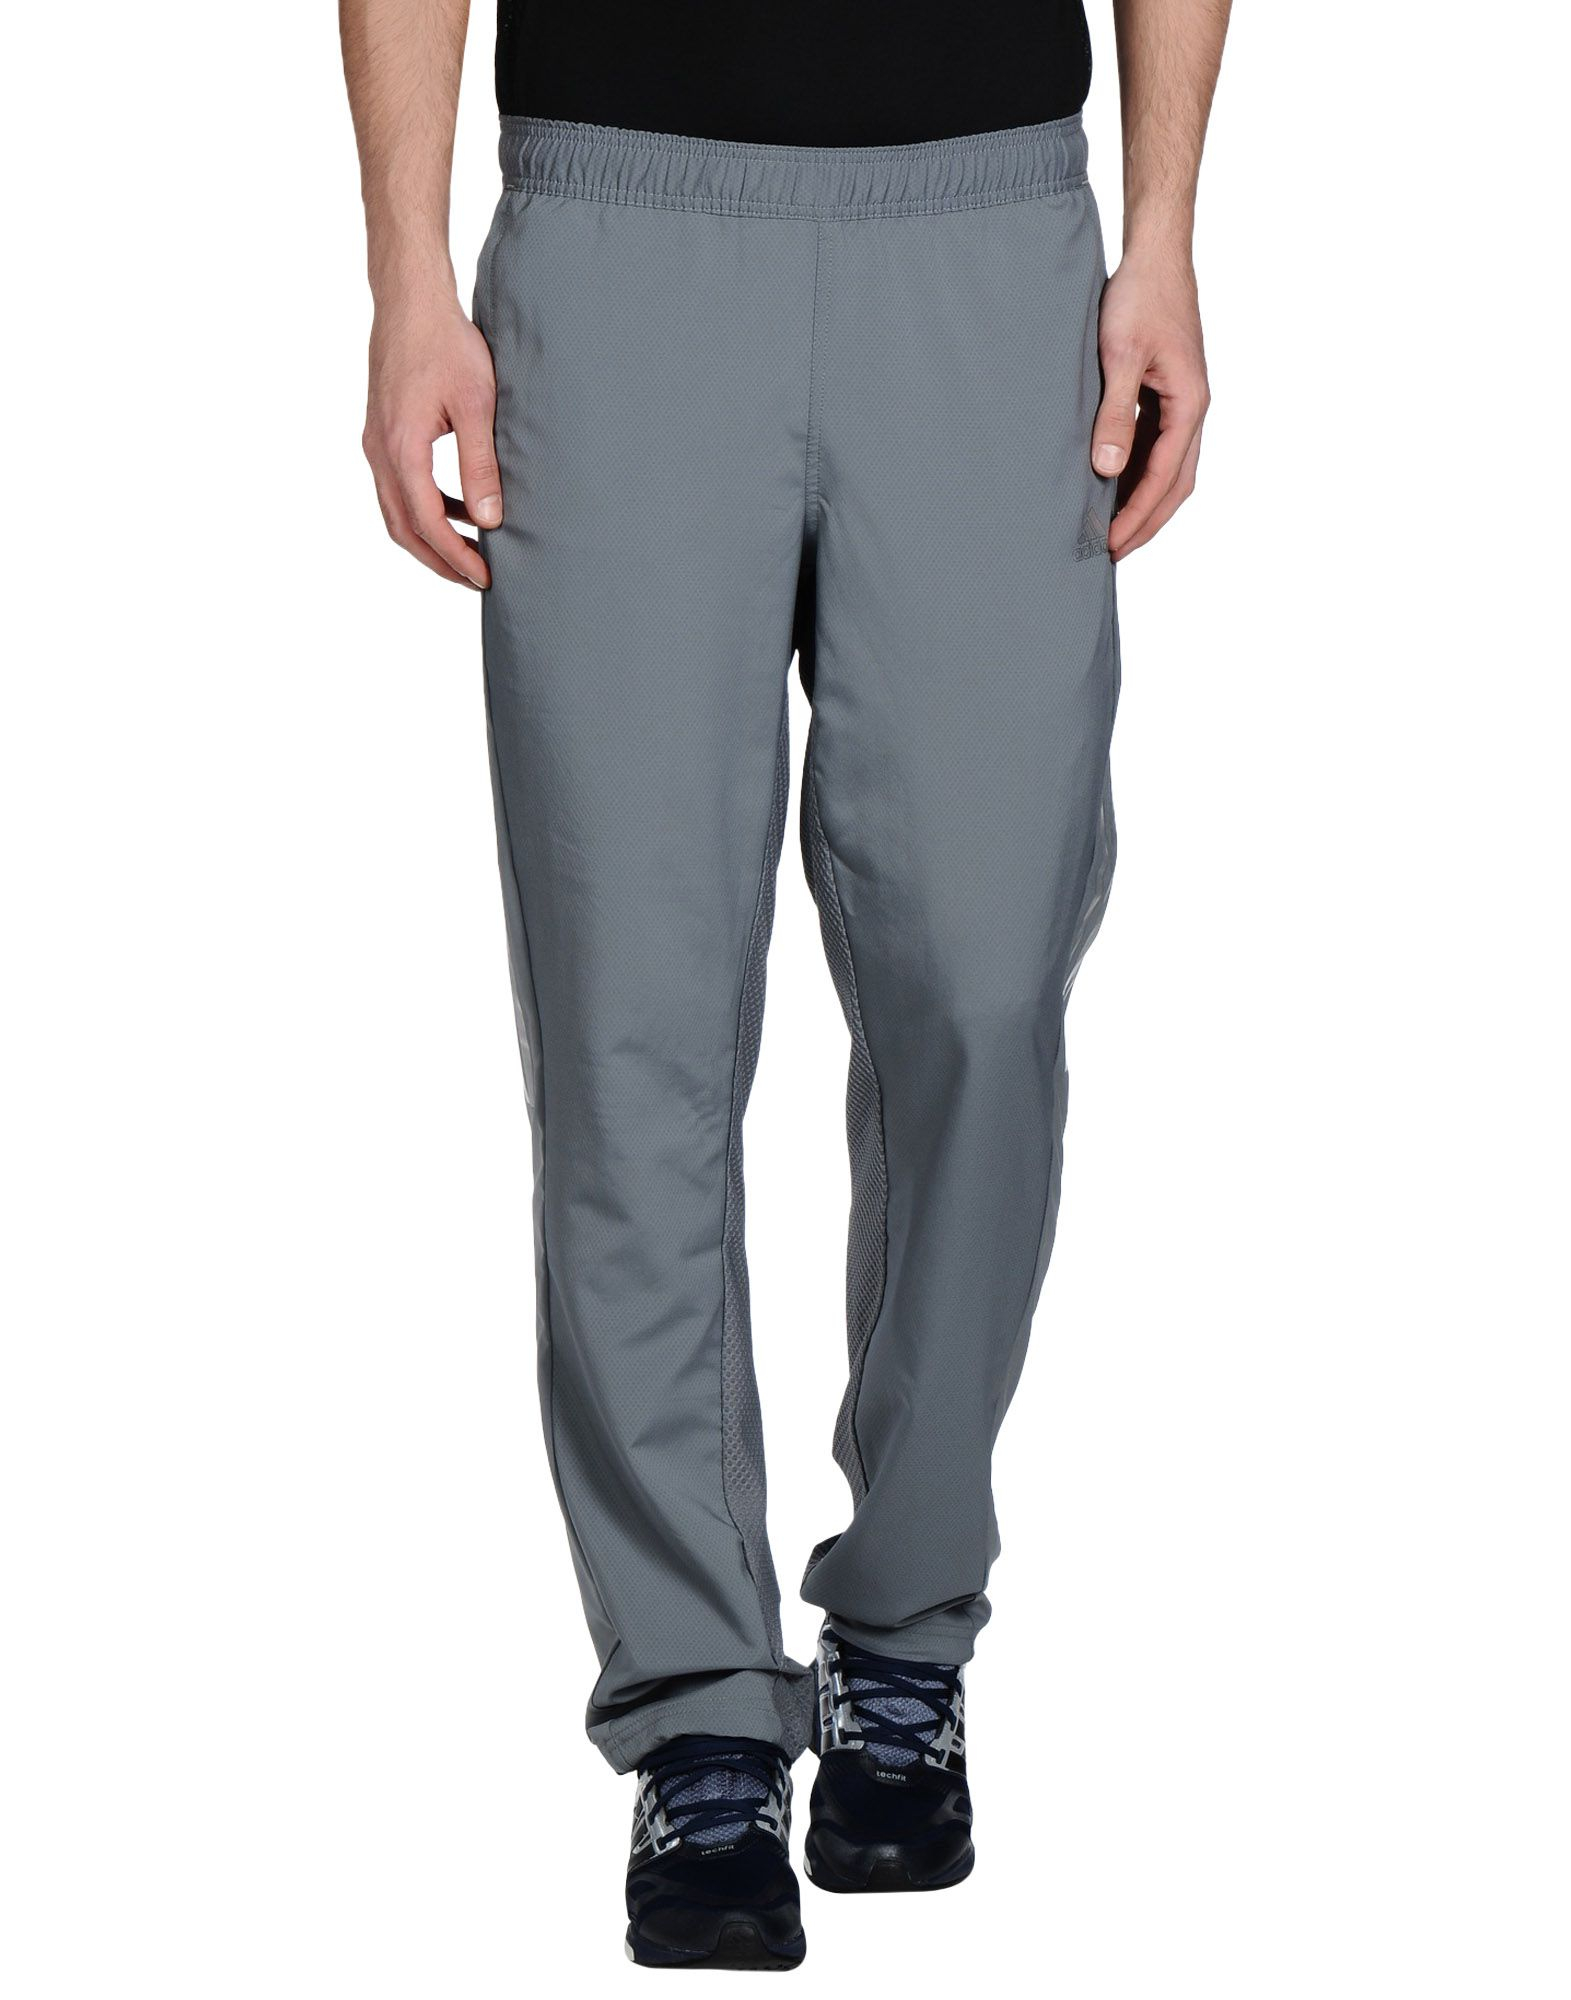 Lyst - Adidas Casual Trouser in Gray for Men